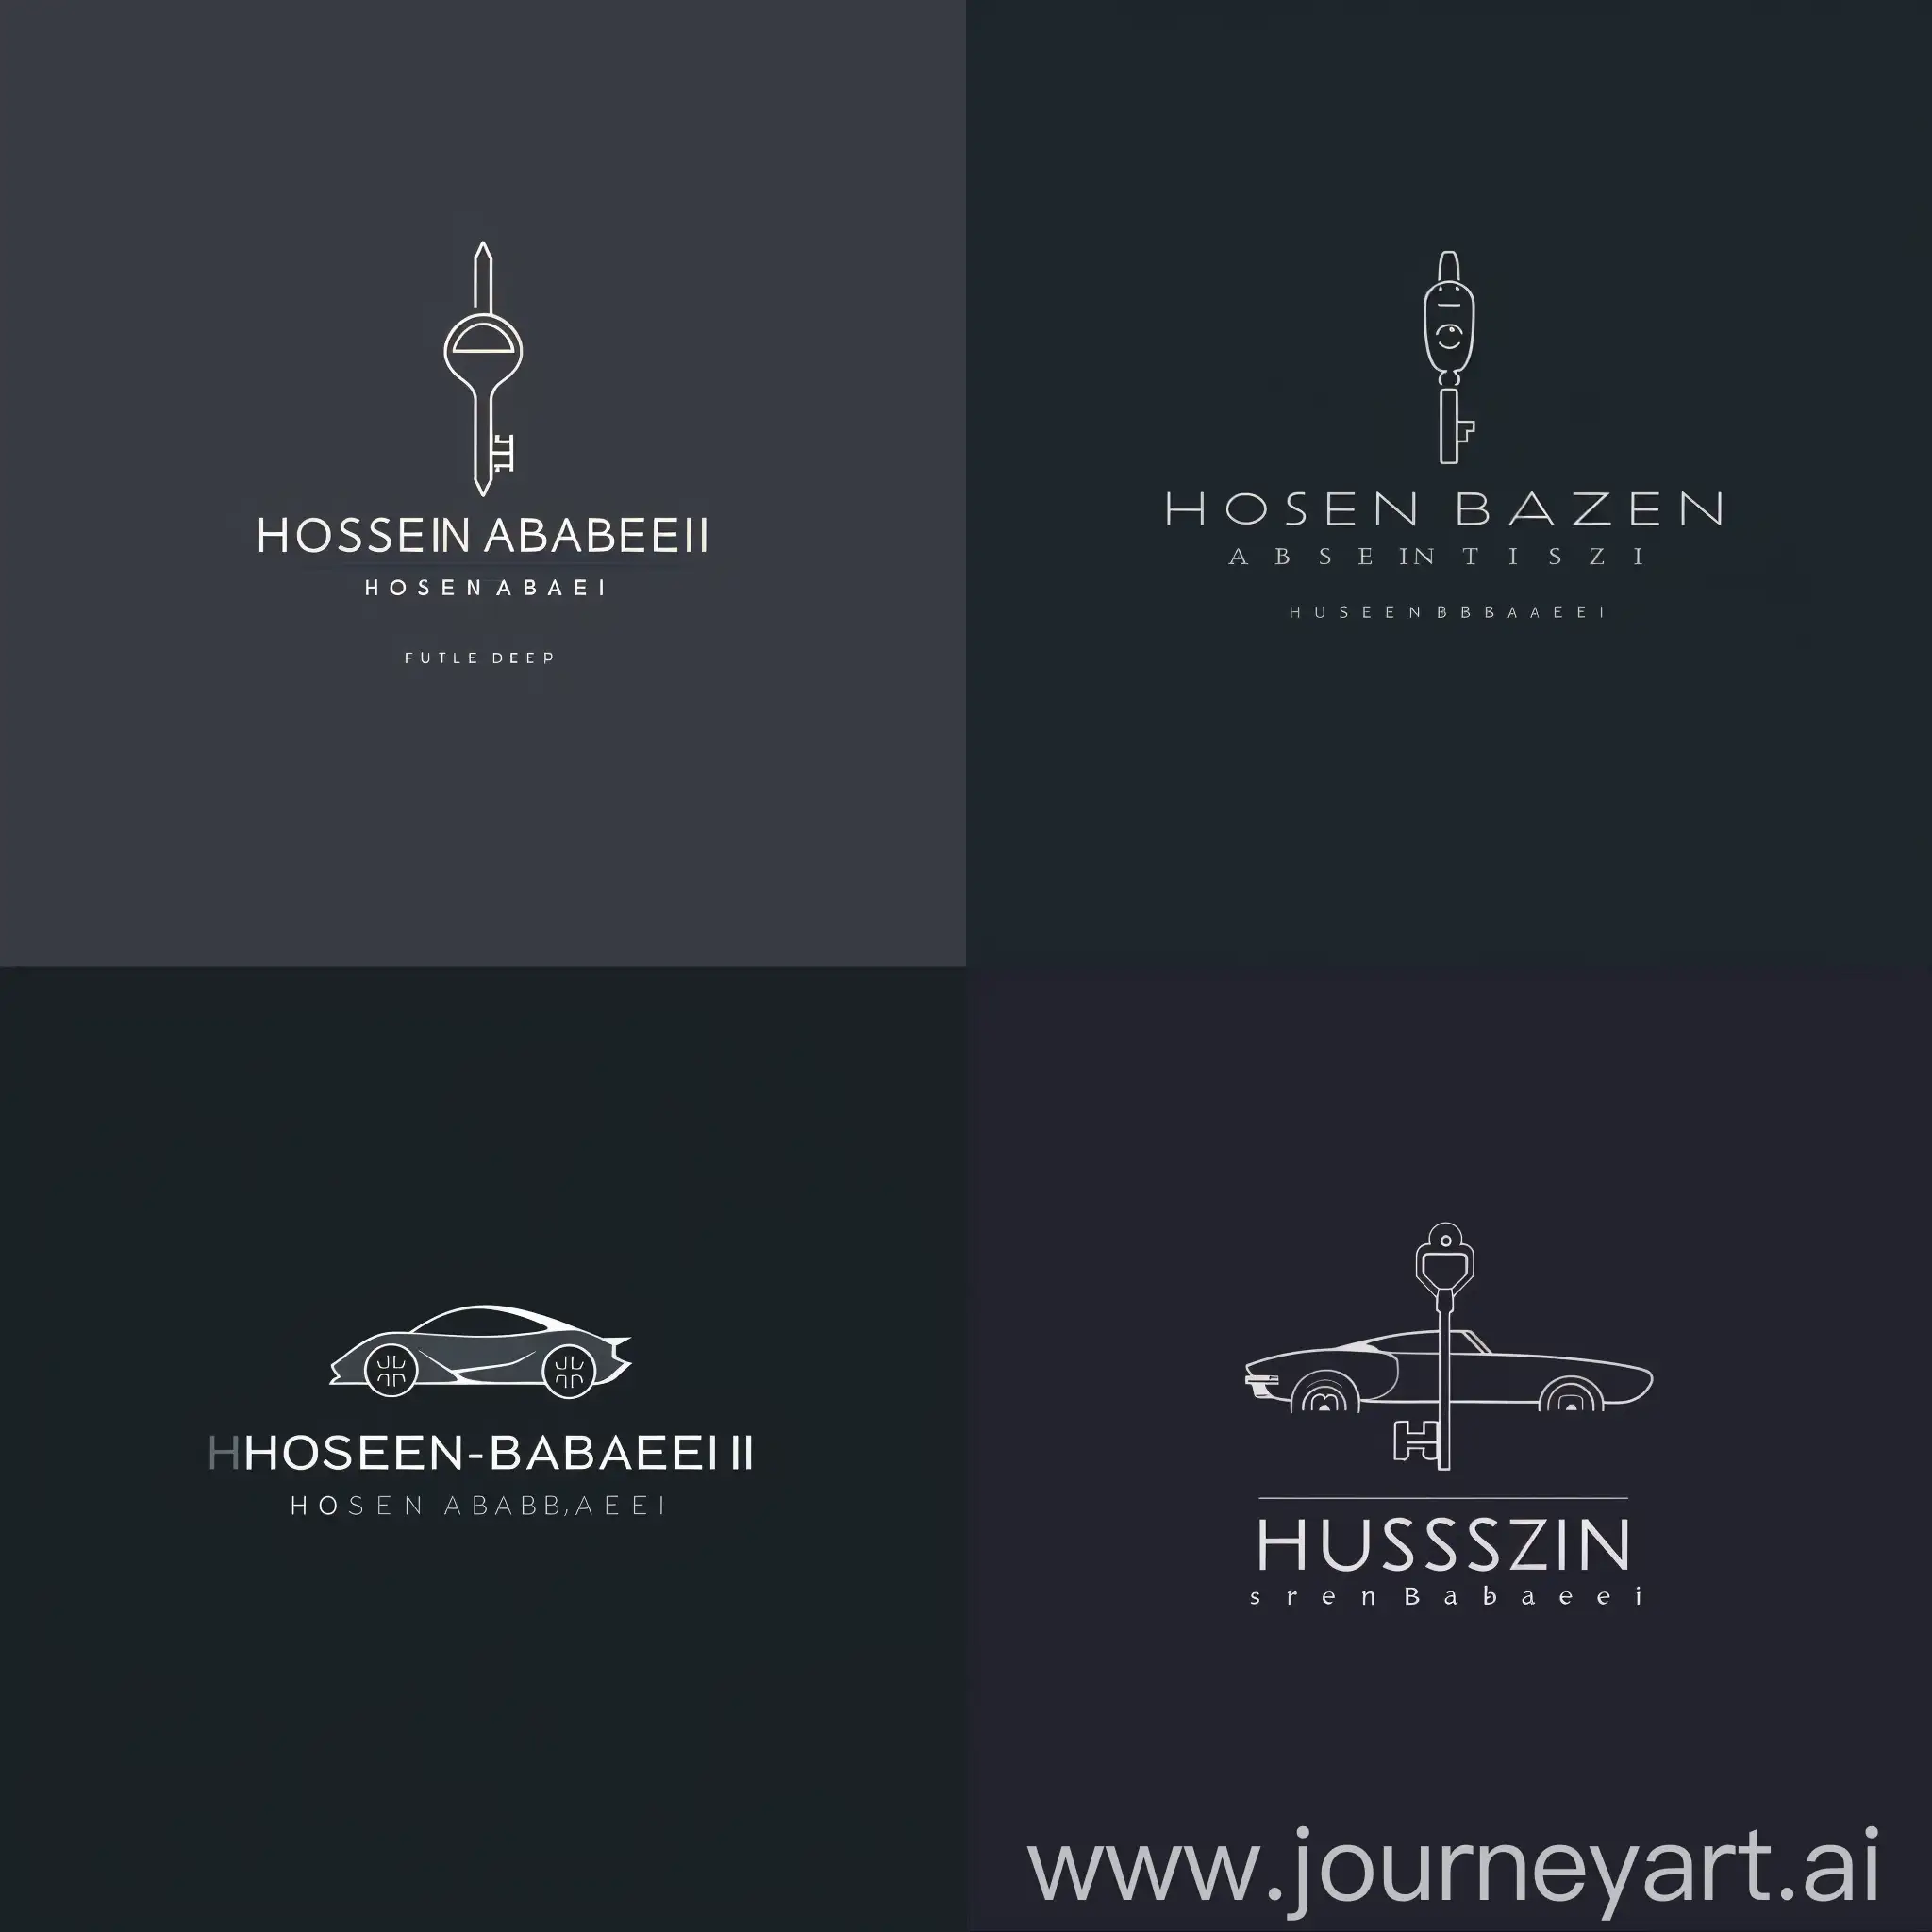 "Create a sleek and minimalist logo to represent the 'Hossein Babaei' car sales exhibition. Focus on simplicity and sophistication in the design, starting with clean and modern typography for the name 'Hossein Babaei'. Utilize a bold and distinctive font to ensure visibility and brand recognition. Pair the text with a subtle yet symbolic icon, such as a stylized car silhouette or a minimalist representation of a key, to convey the automotive theme. Opt for a refined color palette, perhaps incorporating shades of charcoal gray or deep navy blue for a touch of elegance. Strive for a balanced composition, where each element complements the other to create a cohesive and impactful logo. The result should be a timeless emblem that exudes professionalism and captures the essence of the 'Hossein Babaei' car sales exhibition."